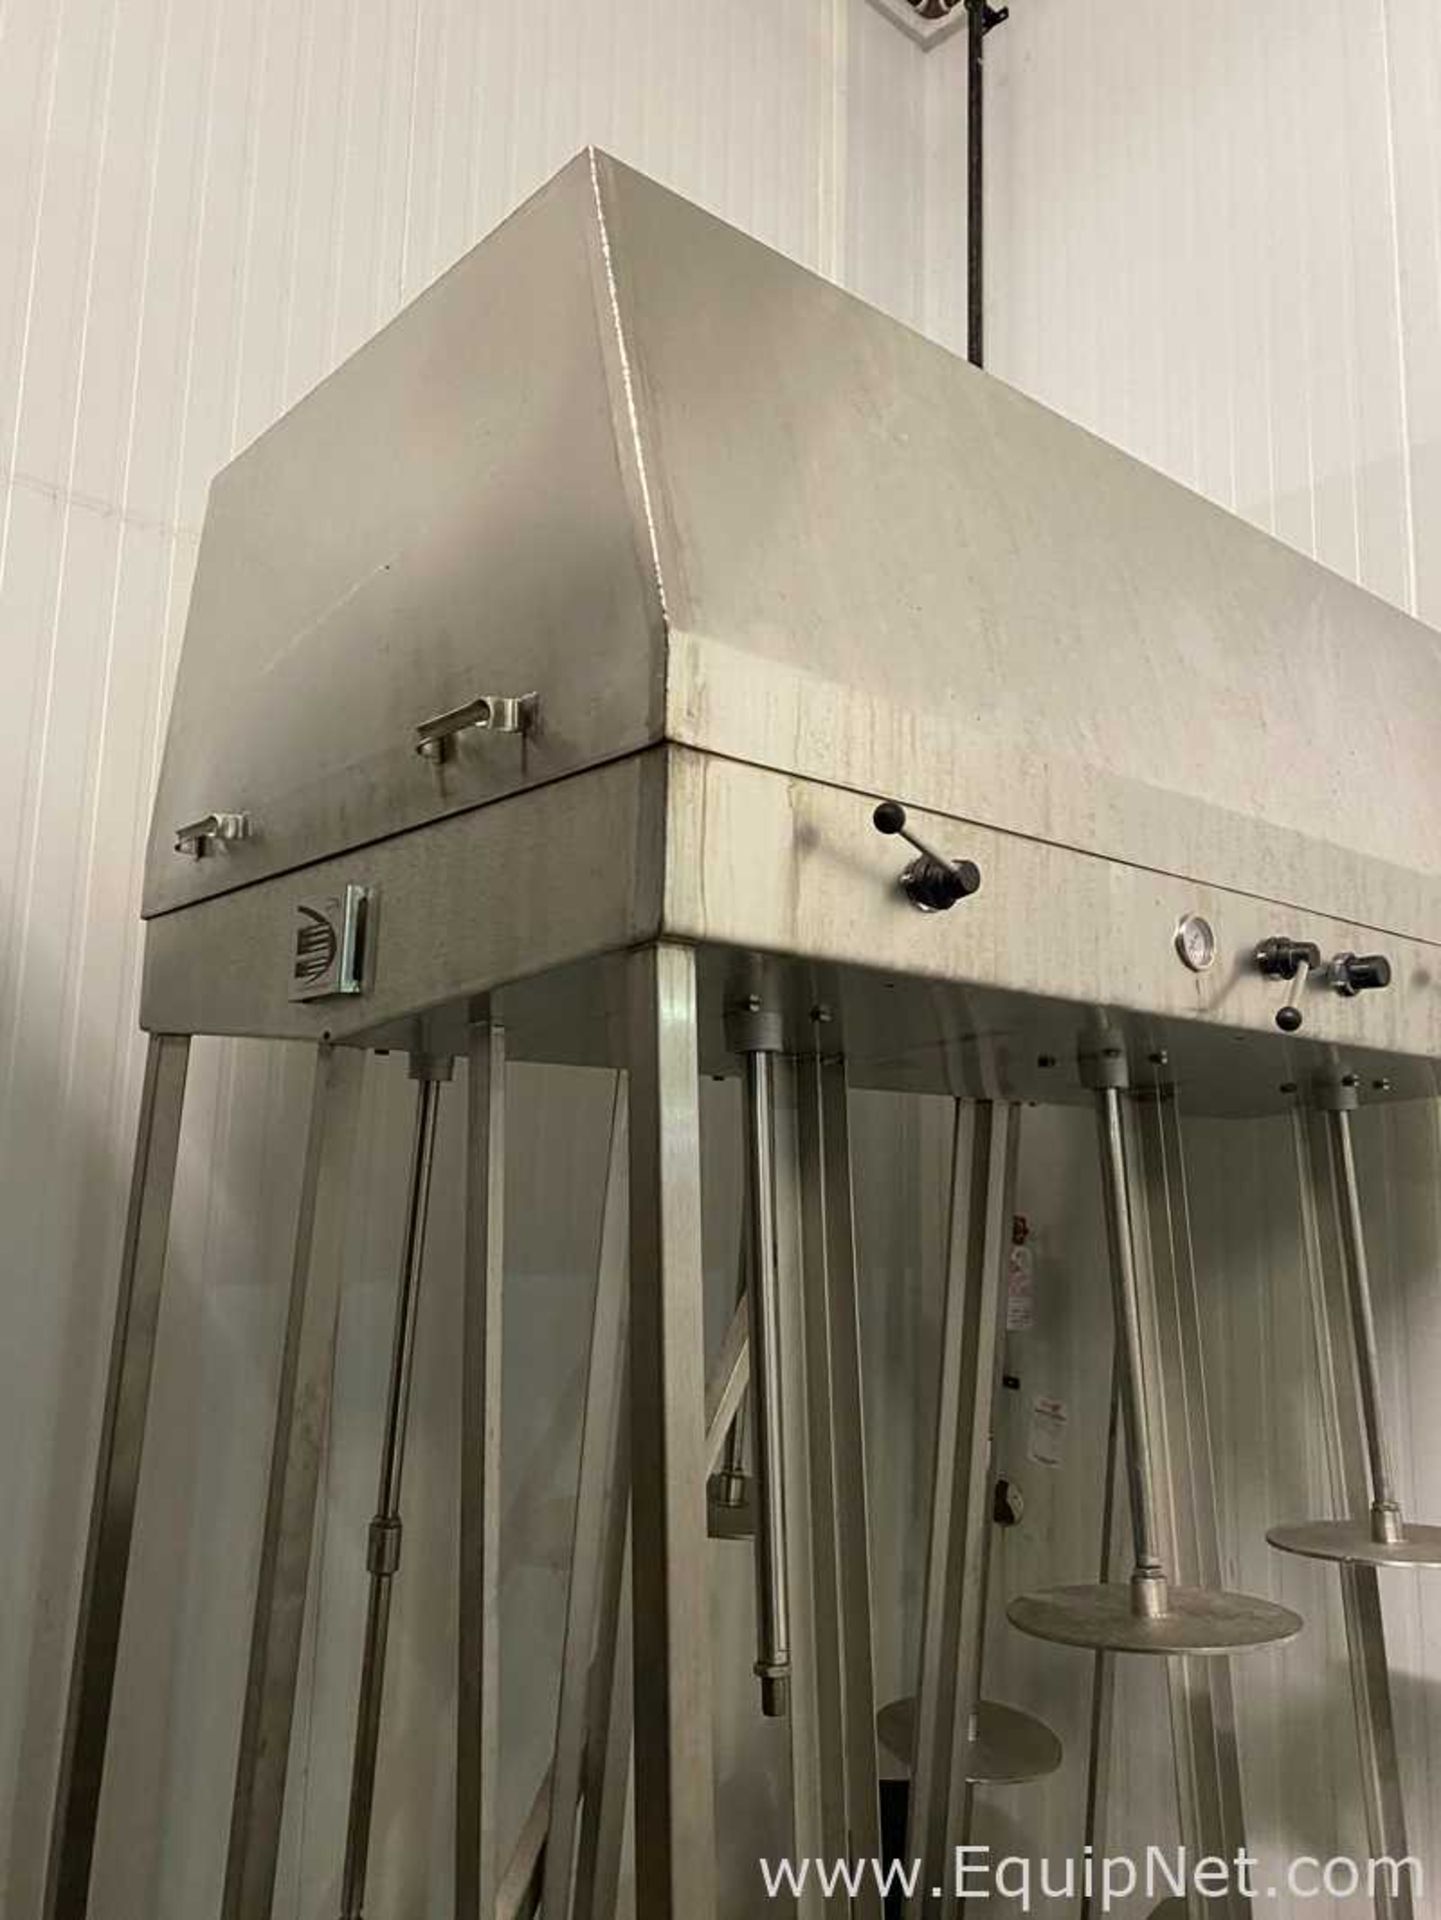 Qualtech PFV-2-06 Vertical Cheese Press - Image 2 of 6